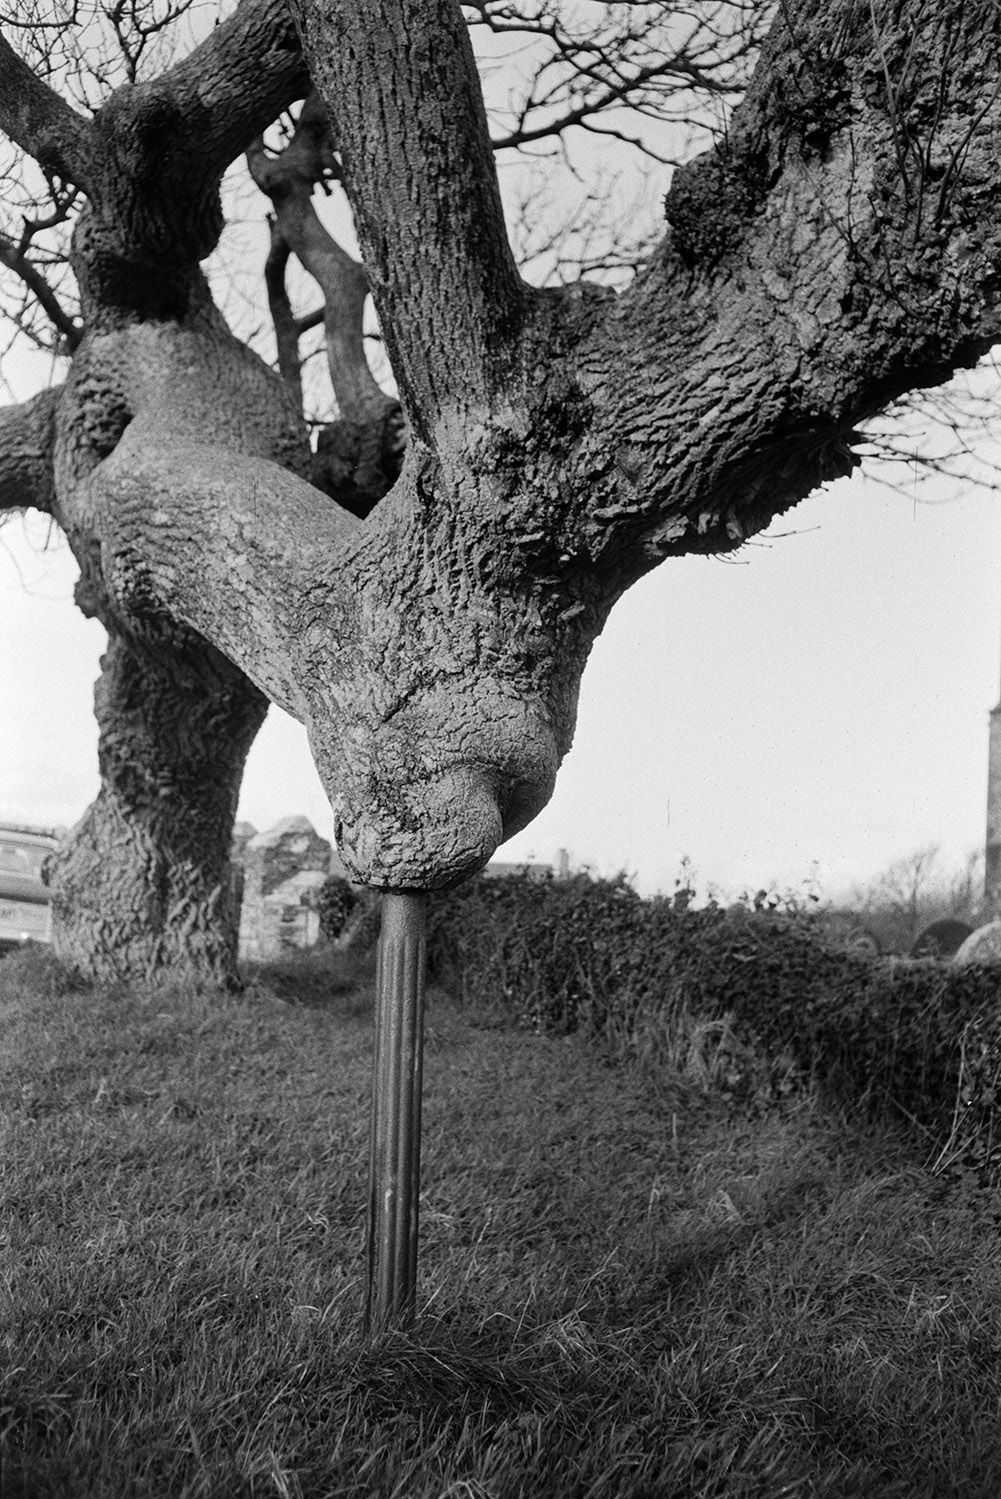 A tree being supported by a metal pole, at Hartland. The tree is next to Hartland Church which is not pictured.